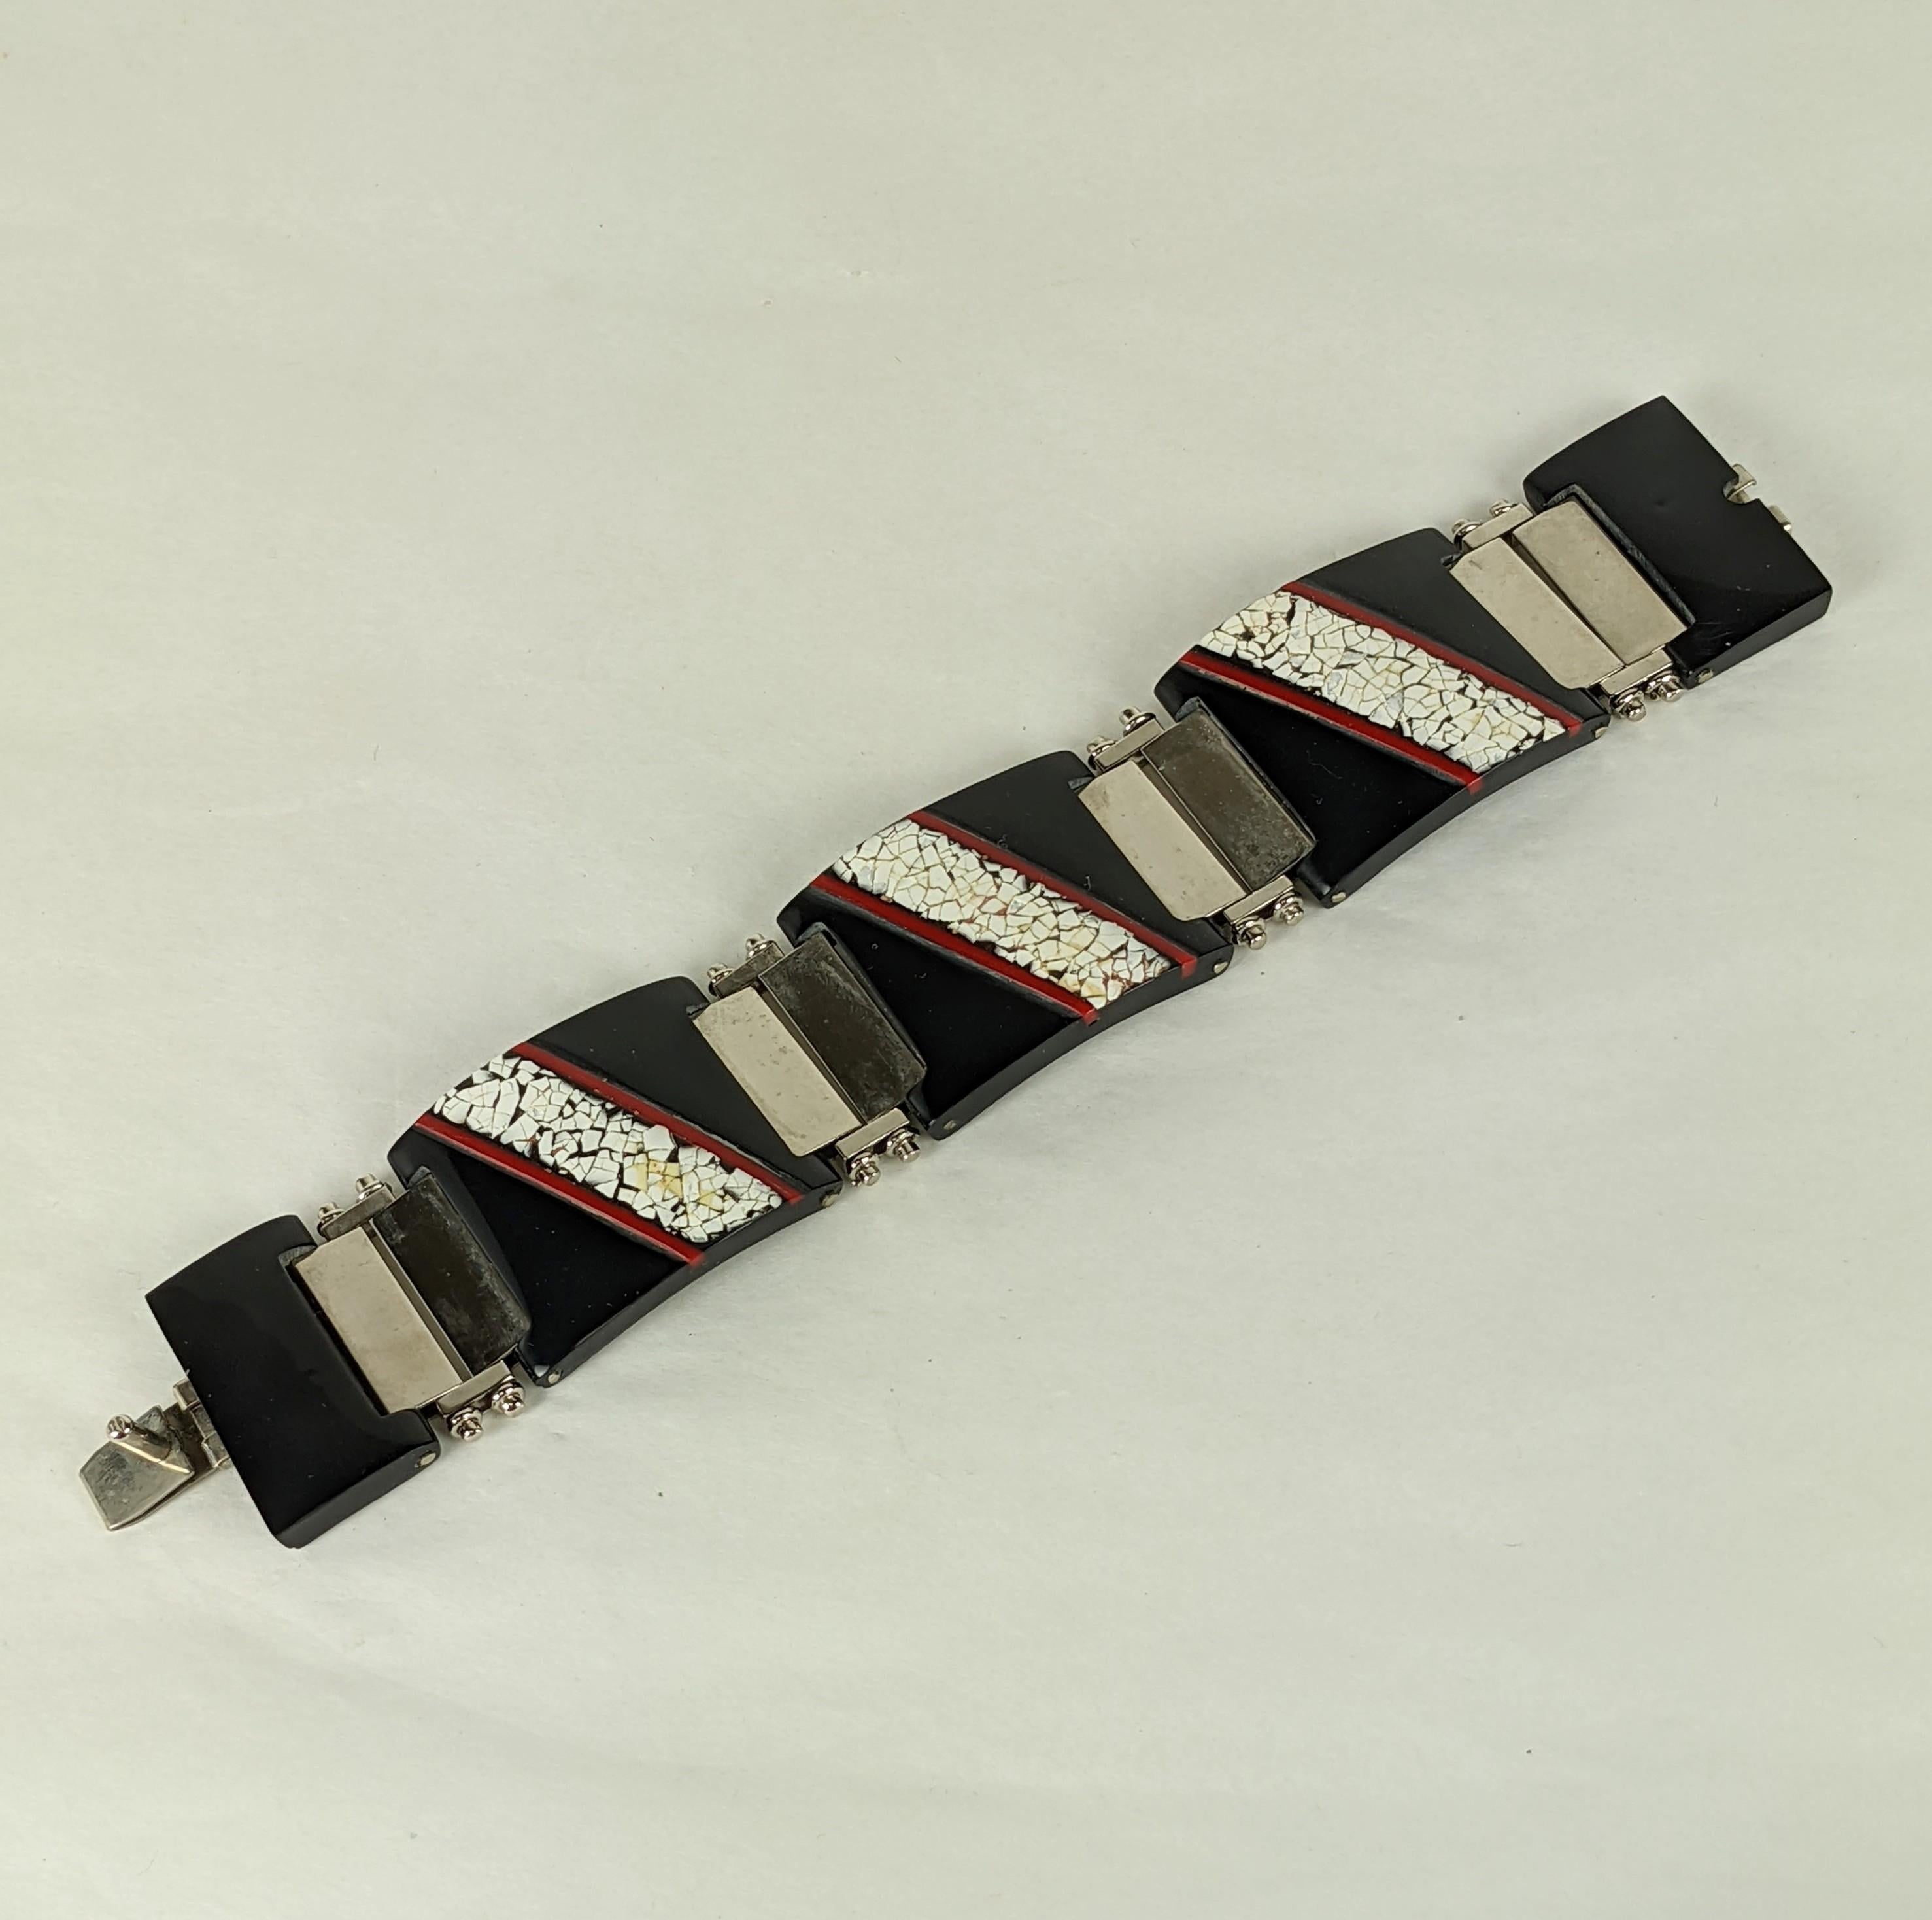 Attractive Art Deco Style Bakelite and Eggshell Lacquer Bracelet from the 1980's. Made in the Art Deco style this link bracelet is composed of black bakelite links inset with eggshell lacquer decoration and red bakelite striped insertions. Chrome